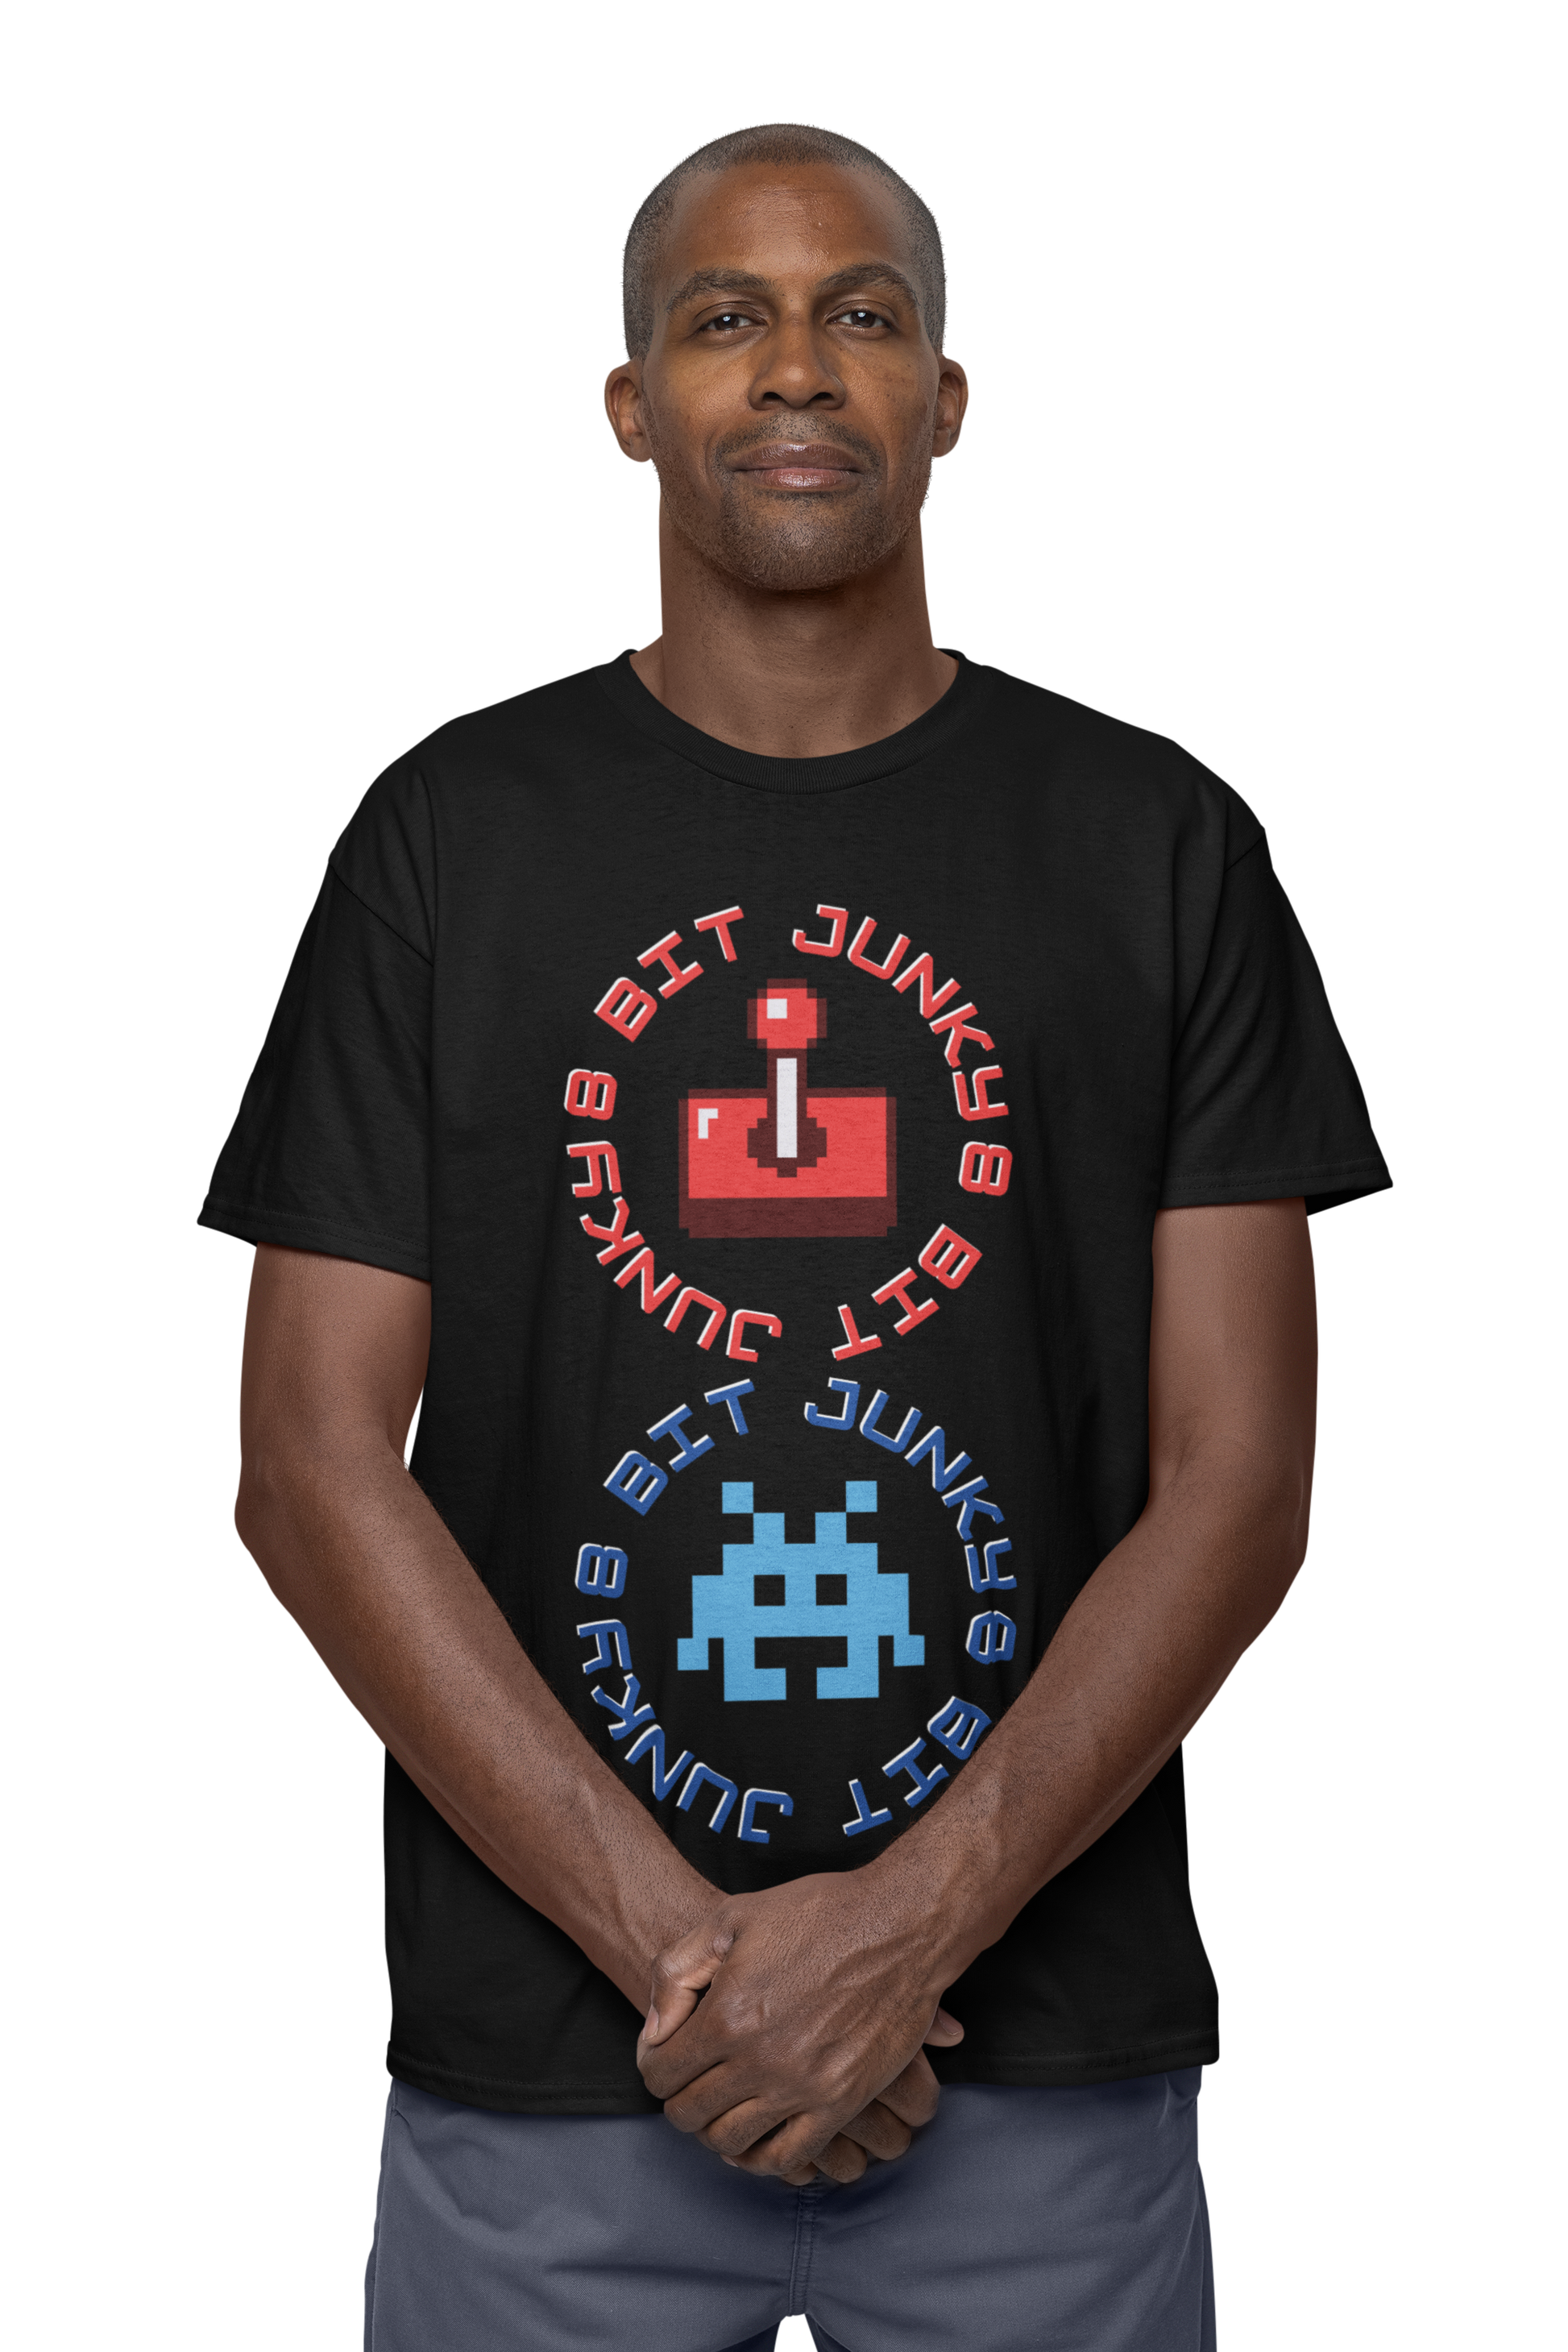 A man wearing a black T-Shirt with words 8-bit junky in 2 circles making a figure 8 with an invader in one circle and joystick in the other